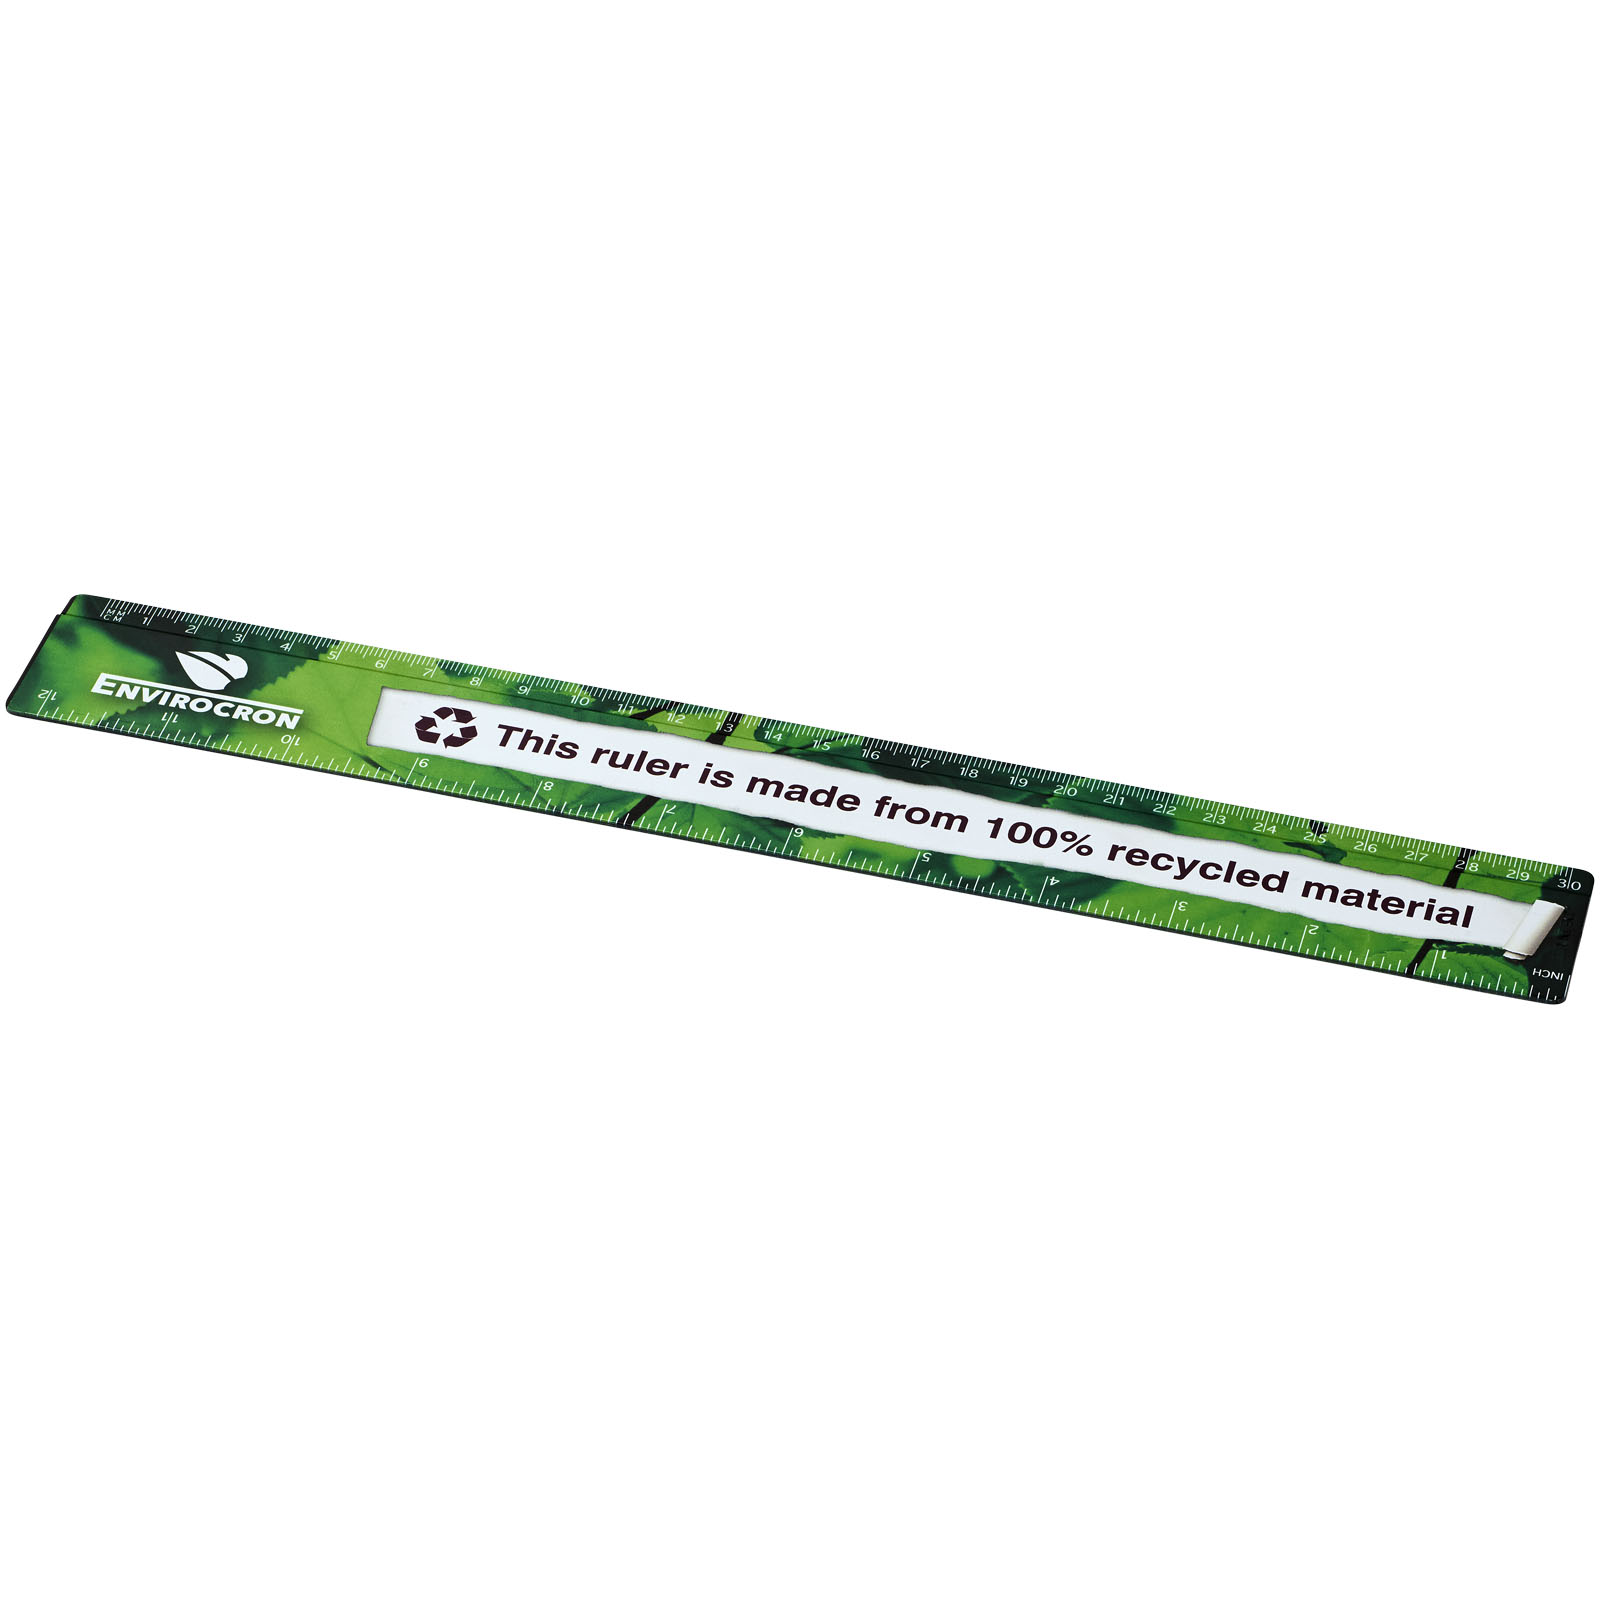 Advertising Desk Accessories - Terran 30 cm ruler from 100% recycled plastic